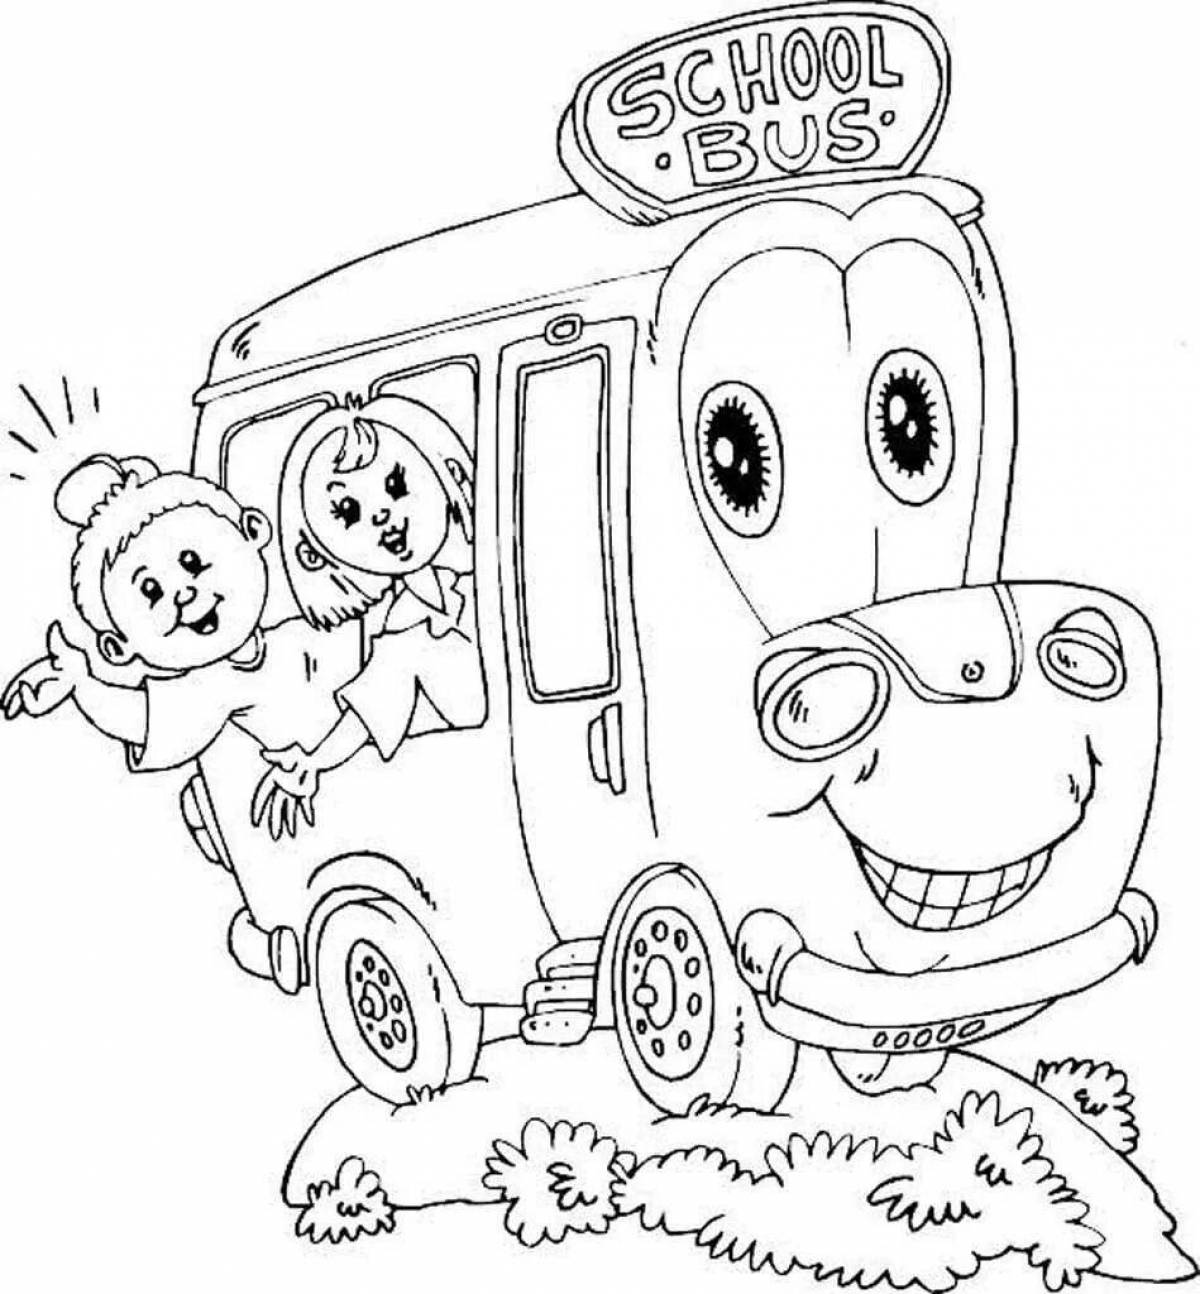 Holiday school bus coloring page